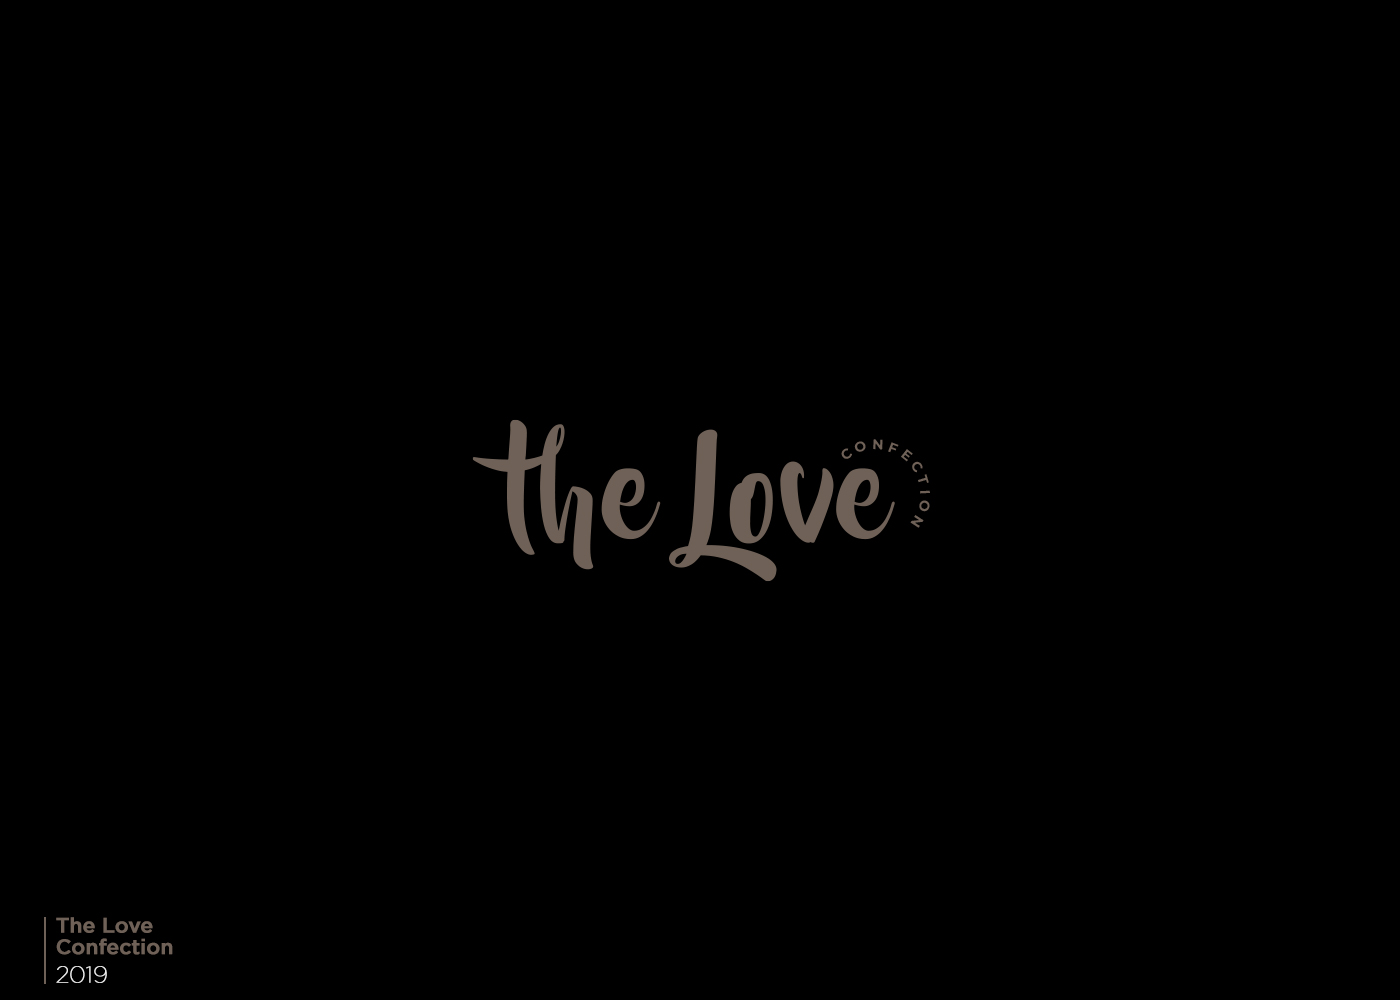 The love confection logo and branding